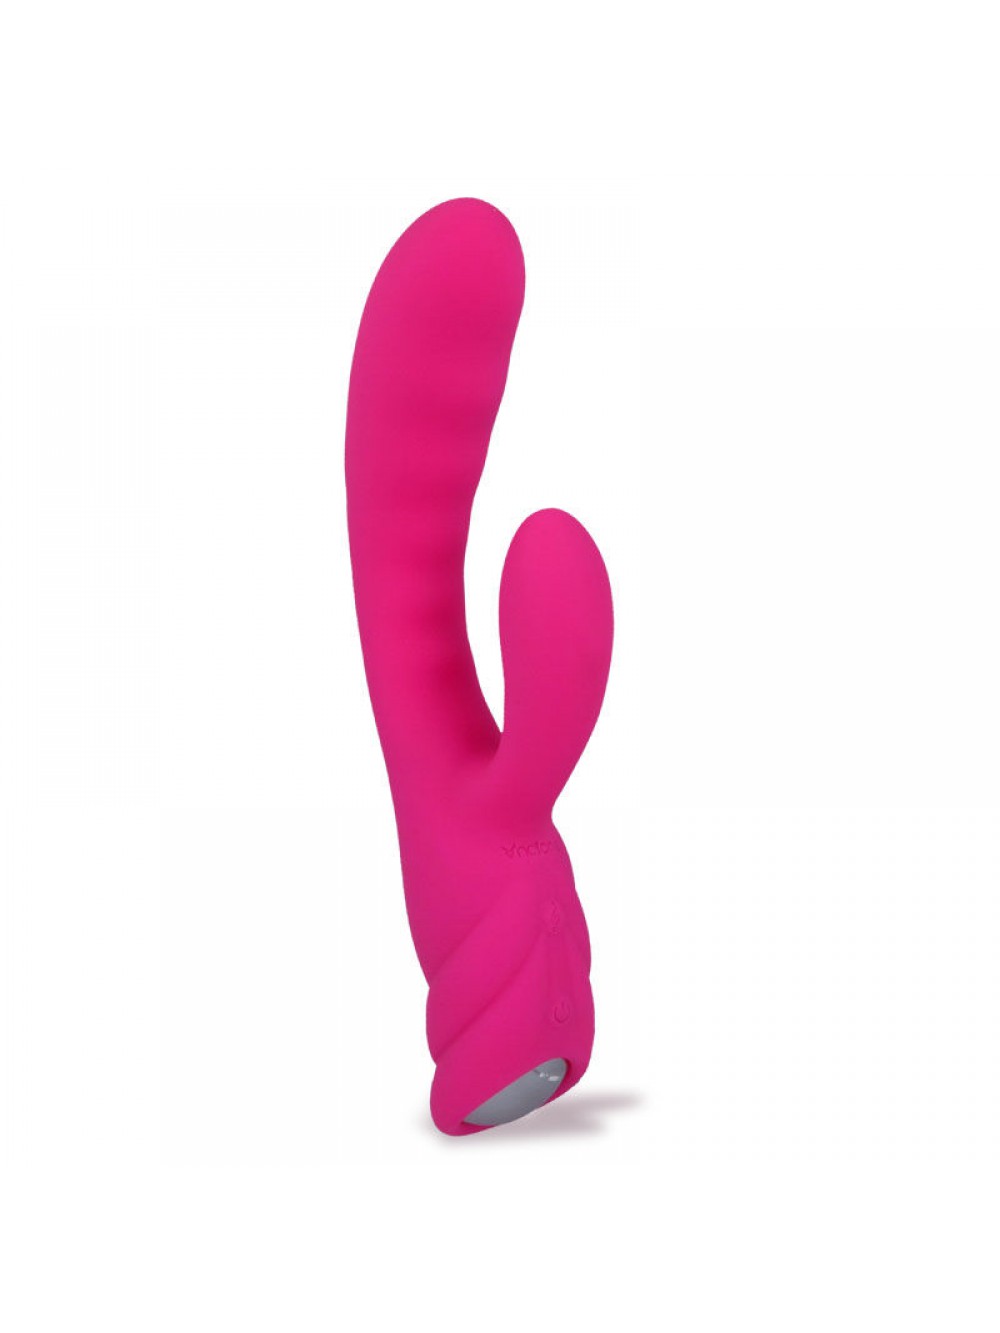 PURE RABBIT VIBRATOR WITH HEATING FUNCTION